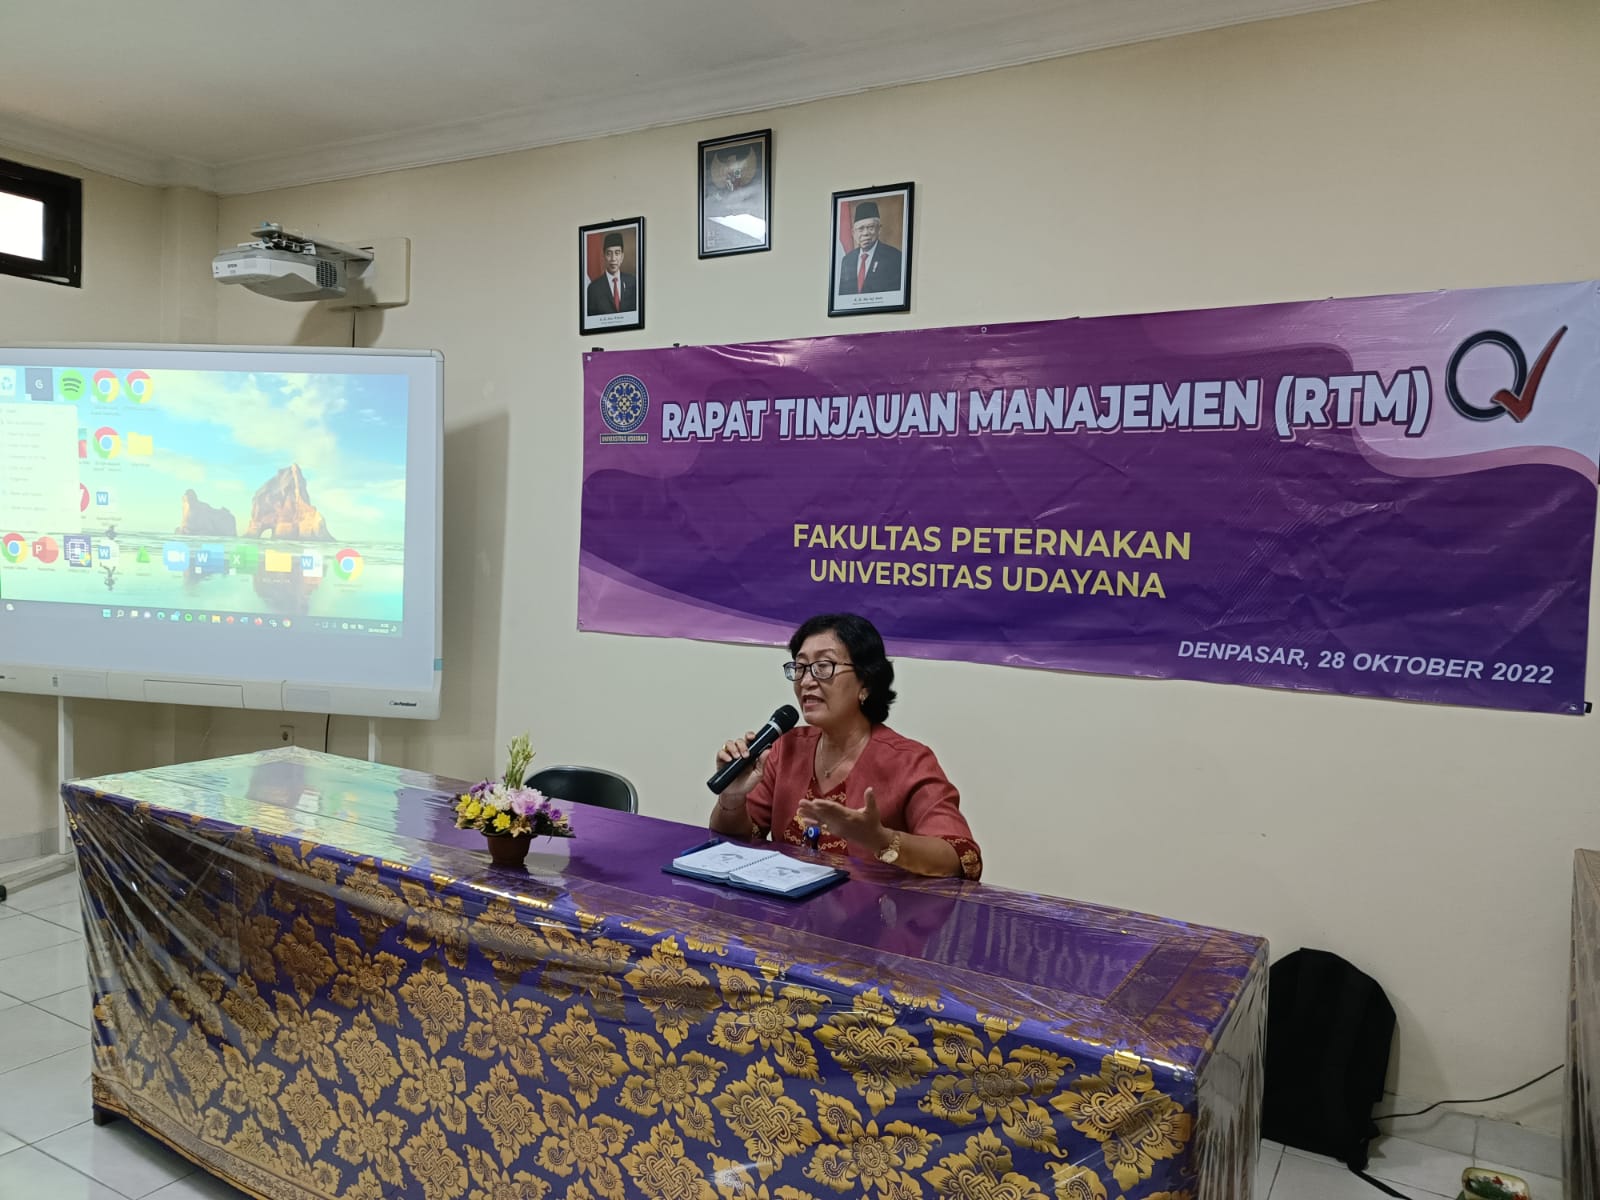 UP3M Faculty of Animal Husbandry Unud Holds RTM, Follow up on AMI's findings